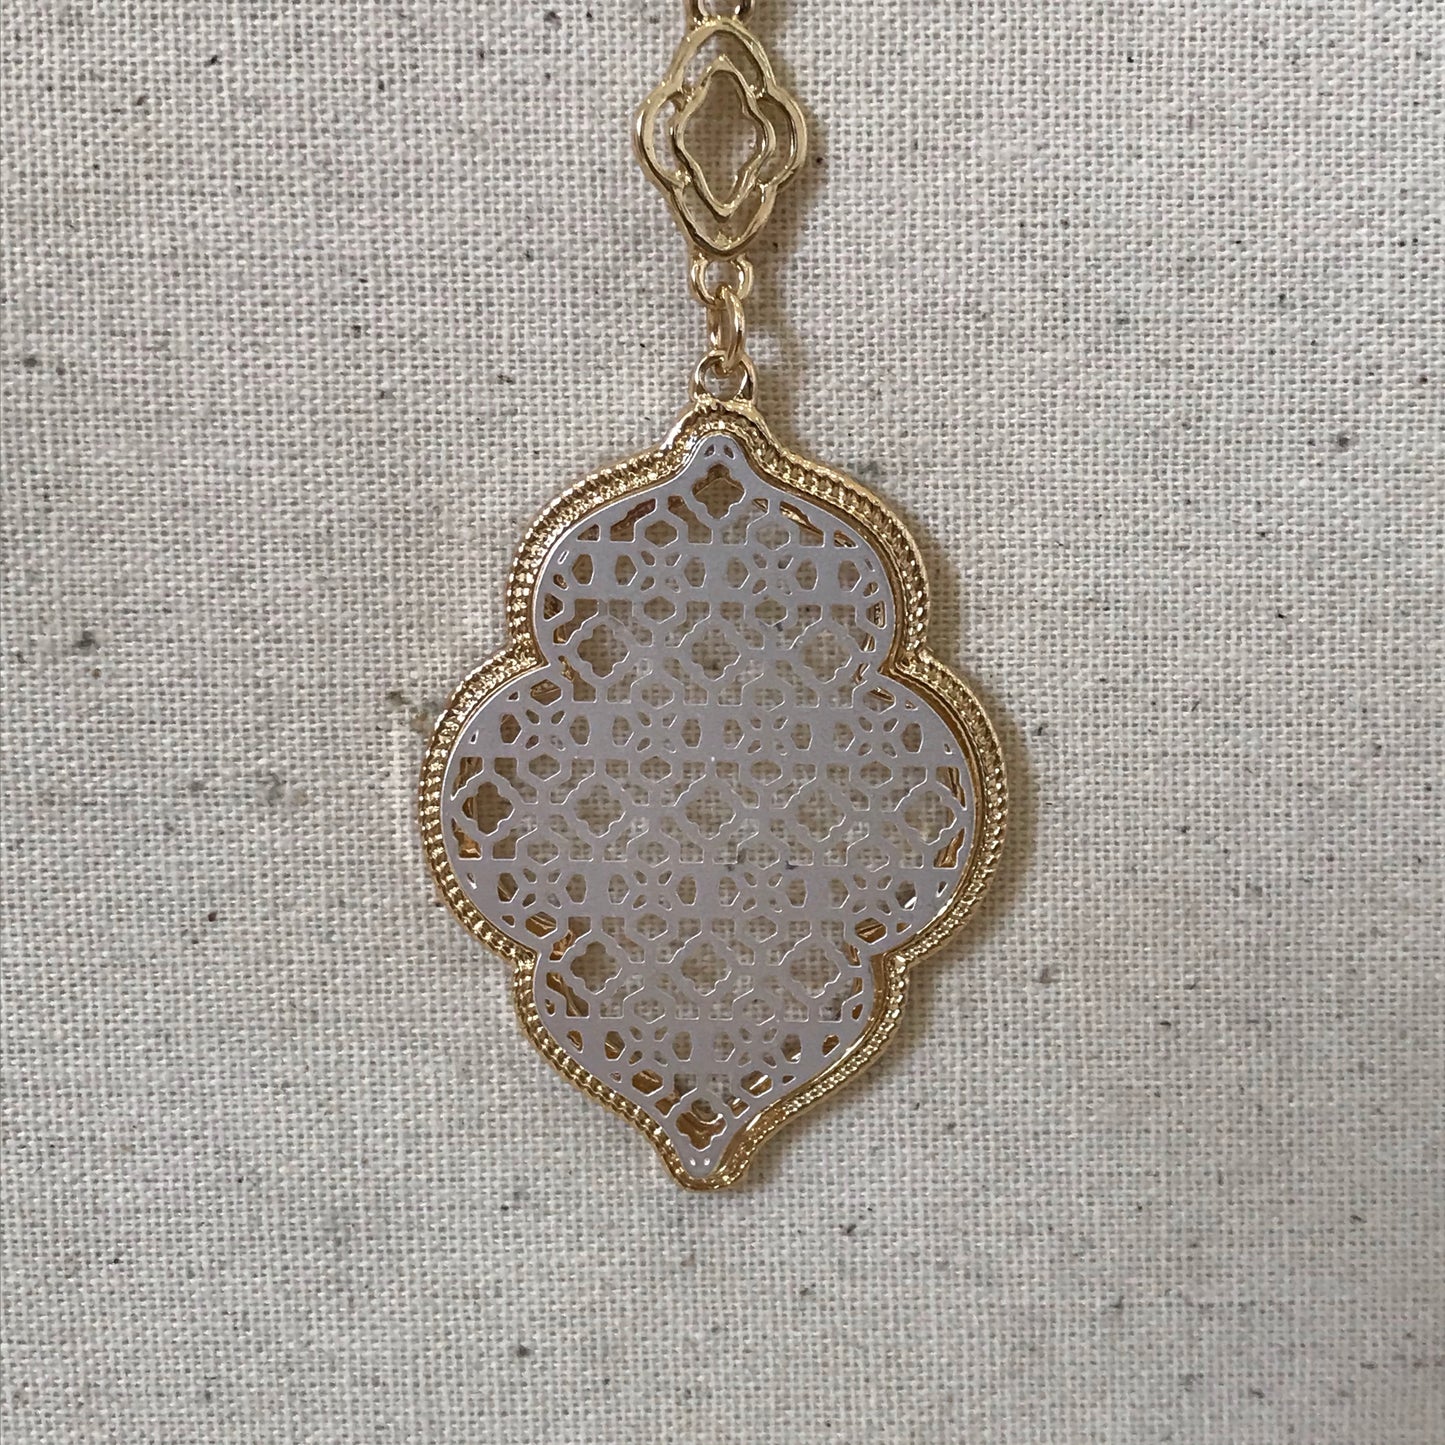 Dainty lace charm gold necklace